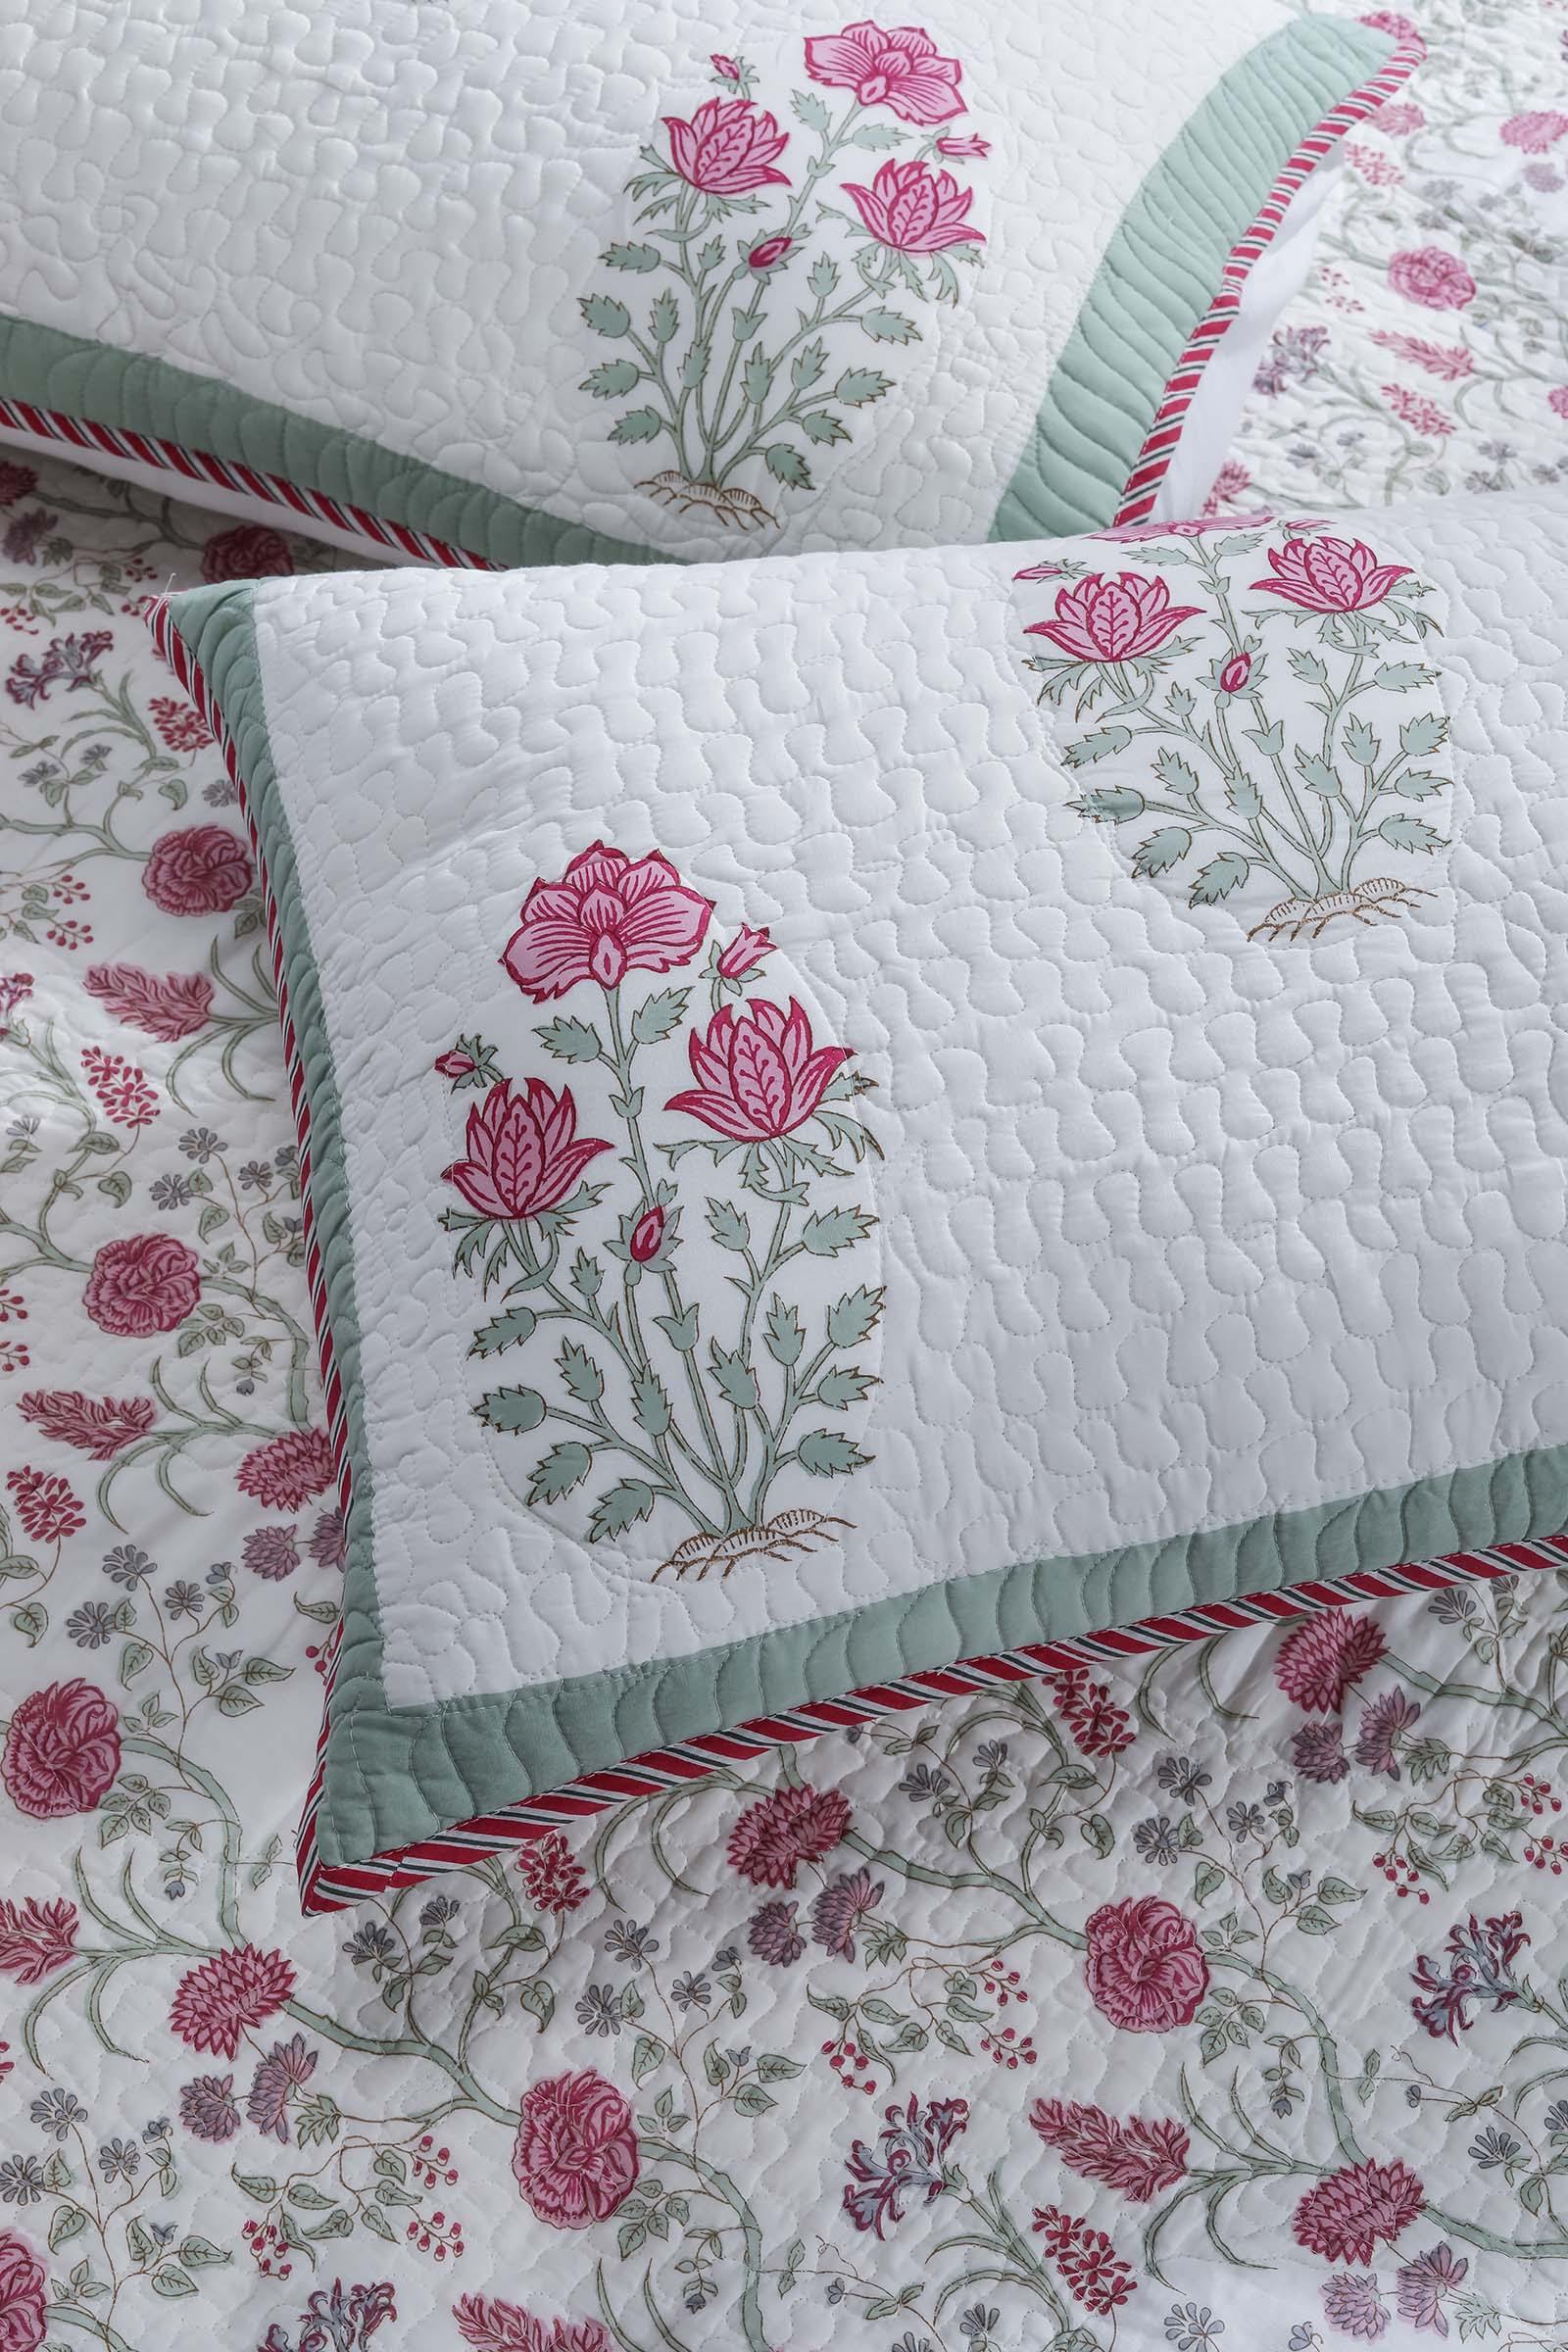 Bagh E Shabnam Quilted Cotton Bedcover - shahenazindia